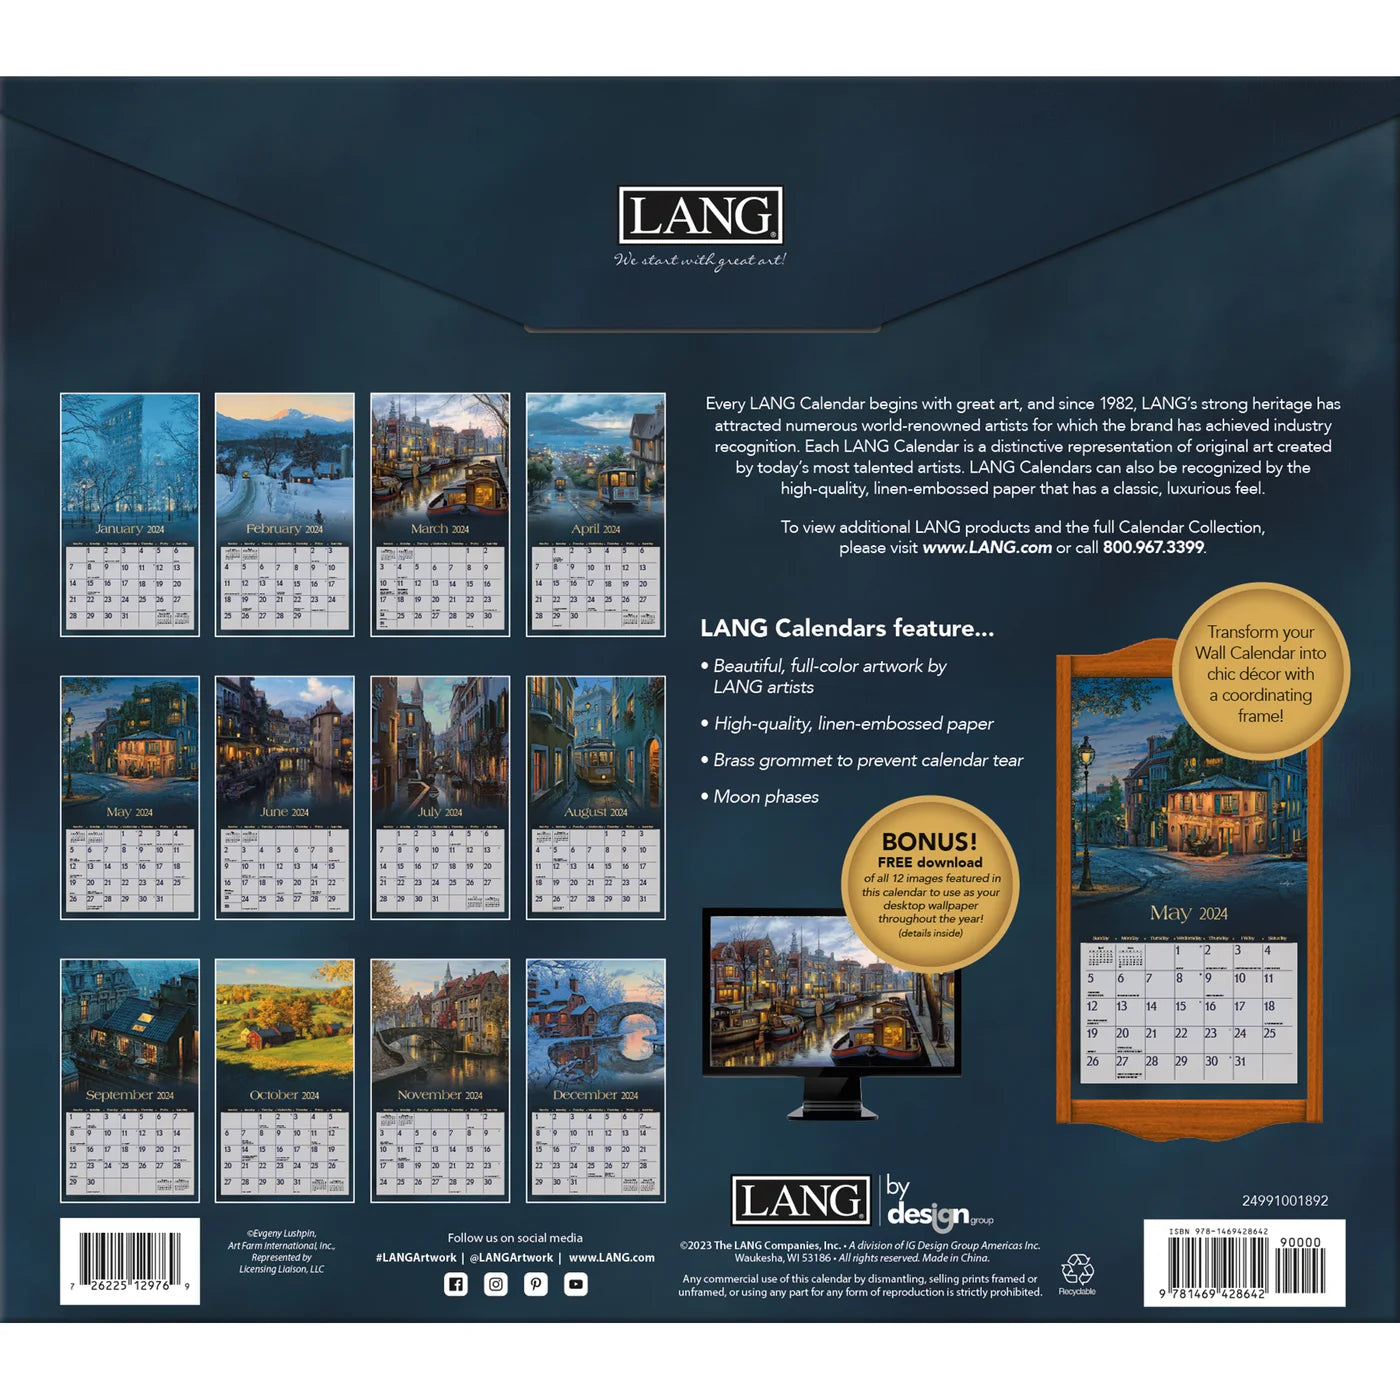 2024 LANG Around The World By Evgeny Lushpin - Deluxe Wall Calendar